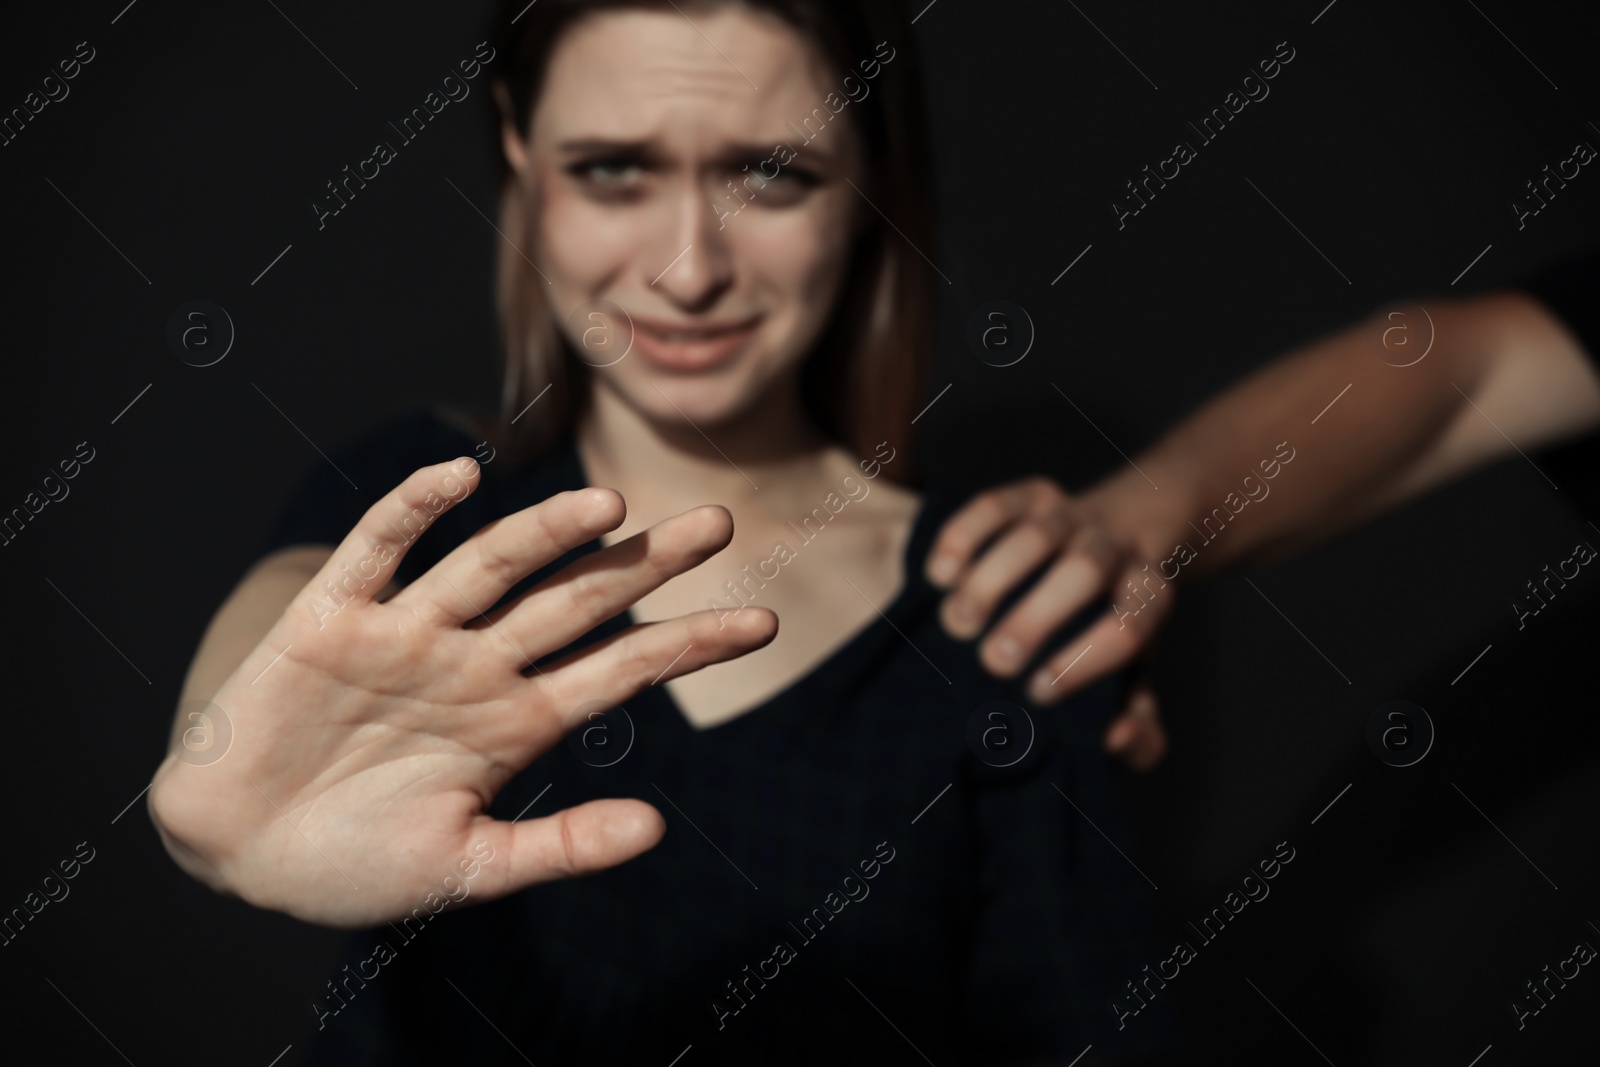 Photo of Man grabbing young woman with outstretched hand on dark background, closeup. Stop sexual assault